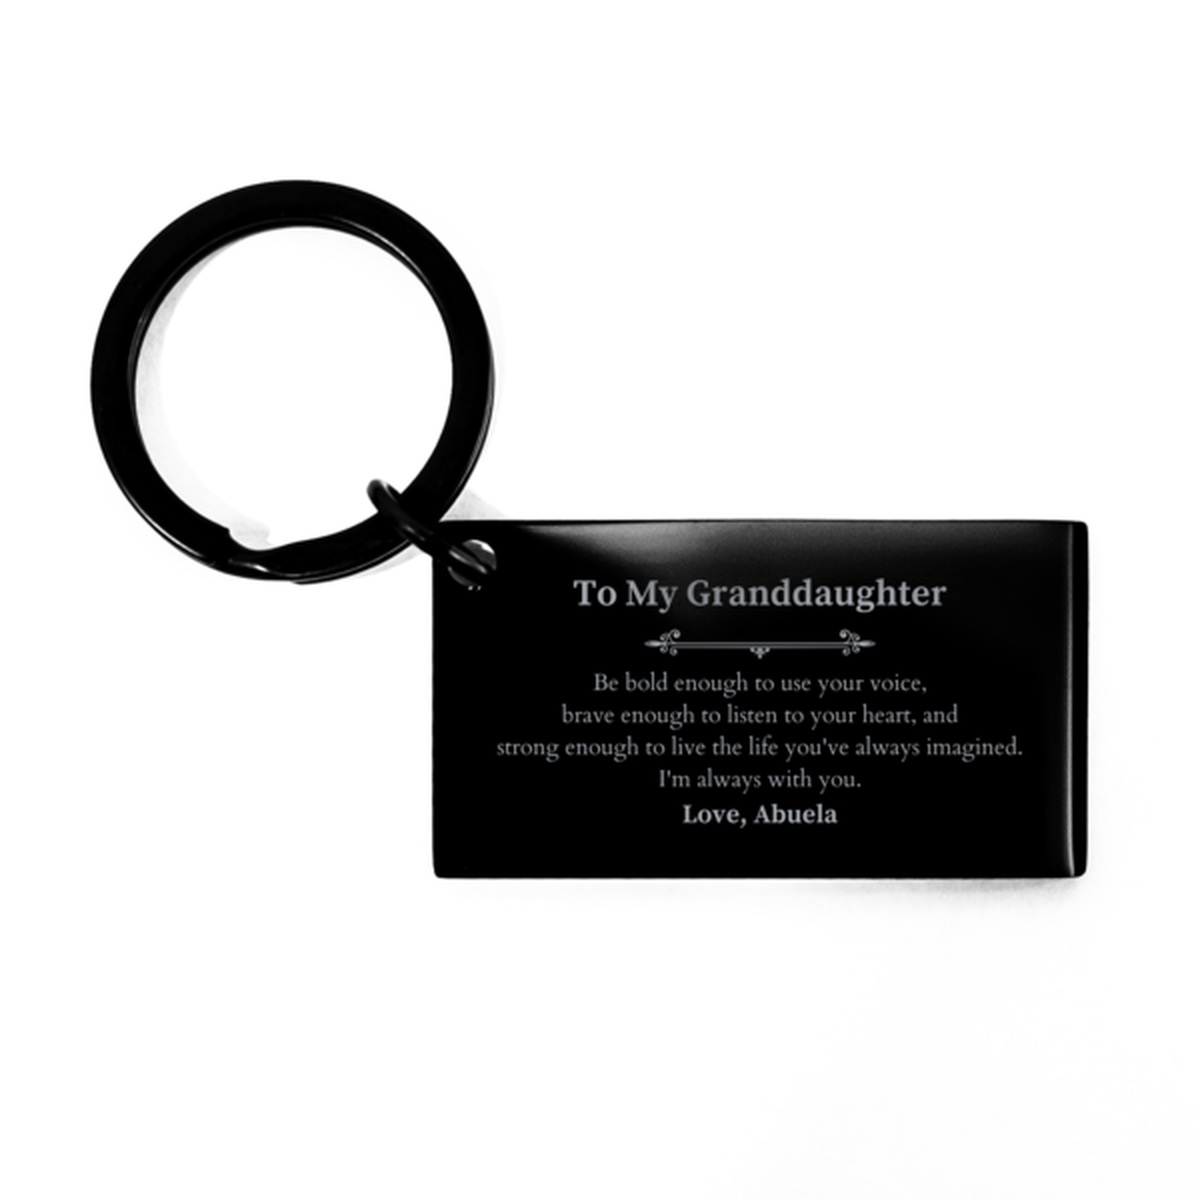 Keepsake Granddaughter Keychain Gift Idea Graduation Christmas Birthday Granddaughter from Abuela, Granddaughter Be bold enough to use your voice, brave enough to listen to your heart. Love, Abuela